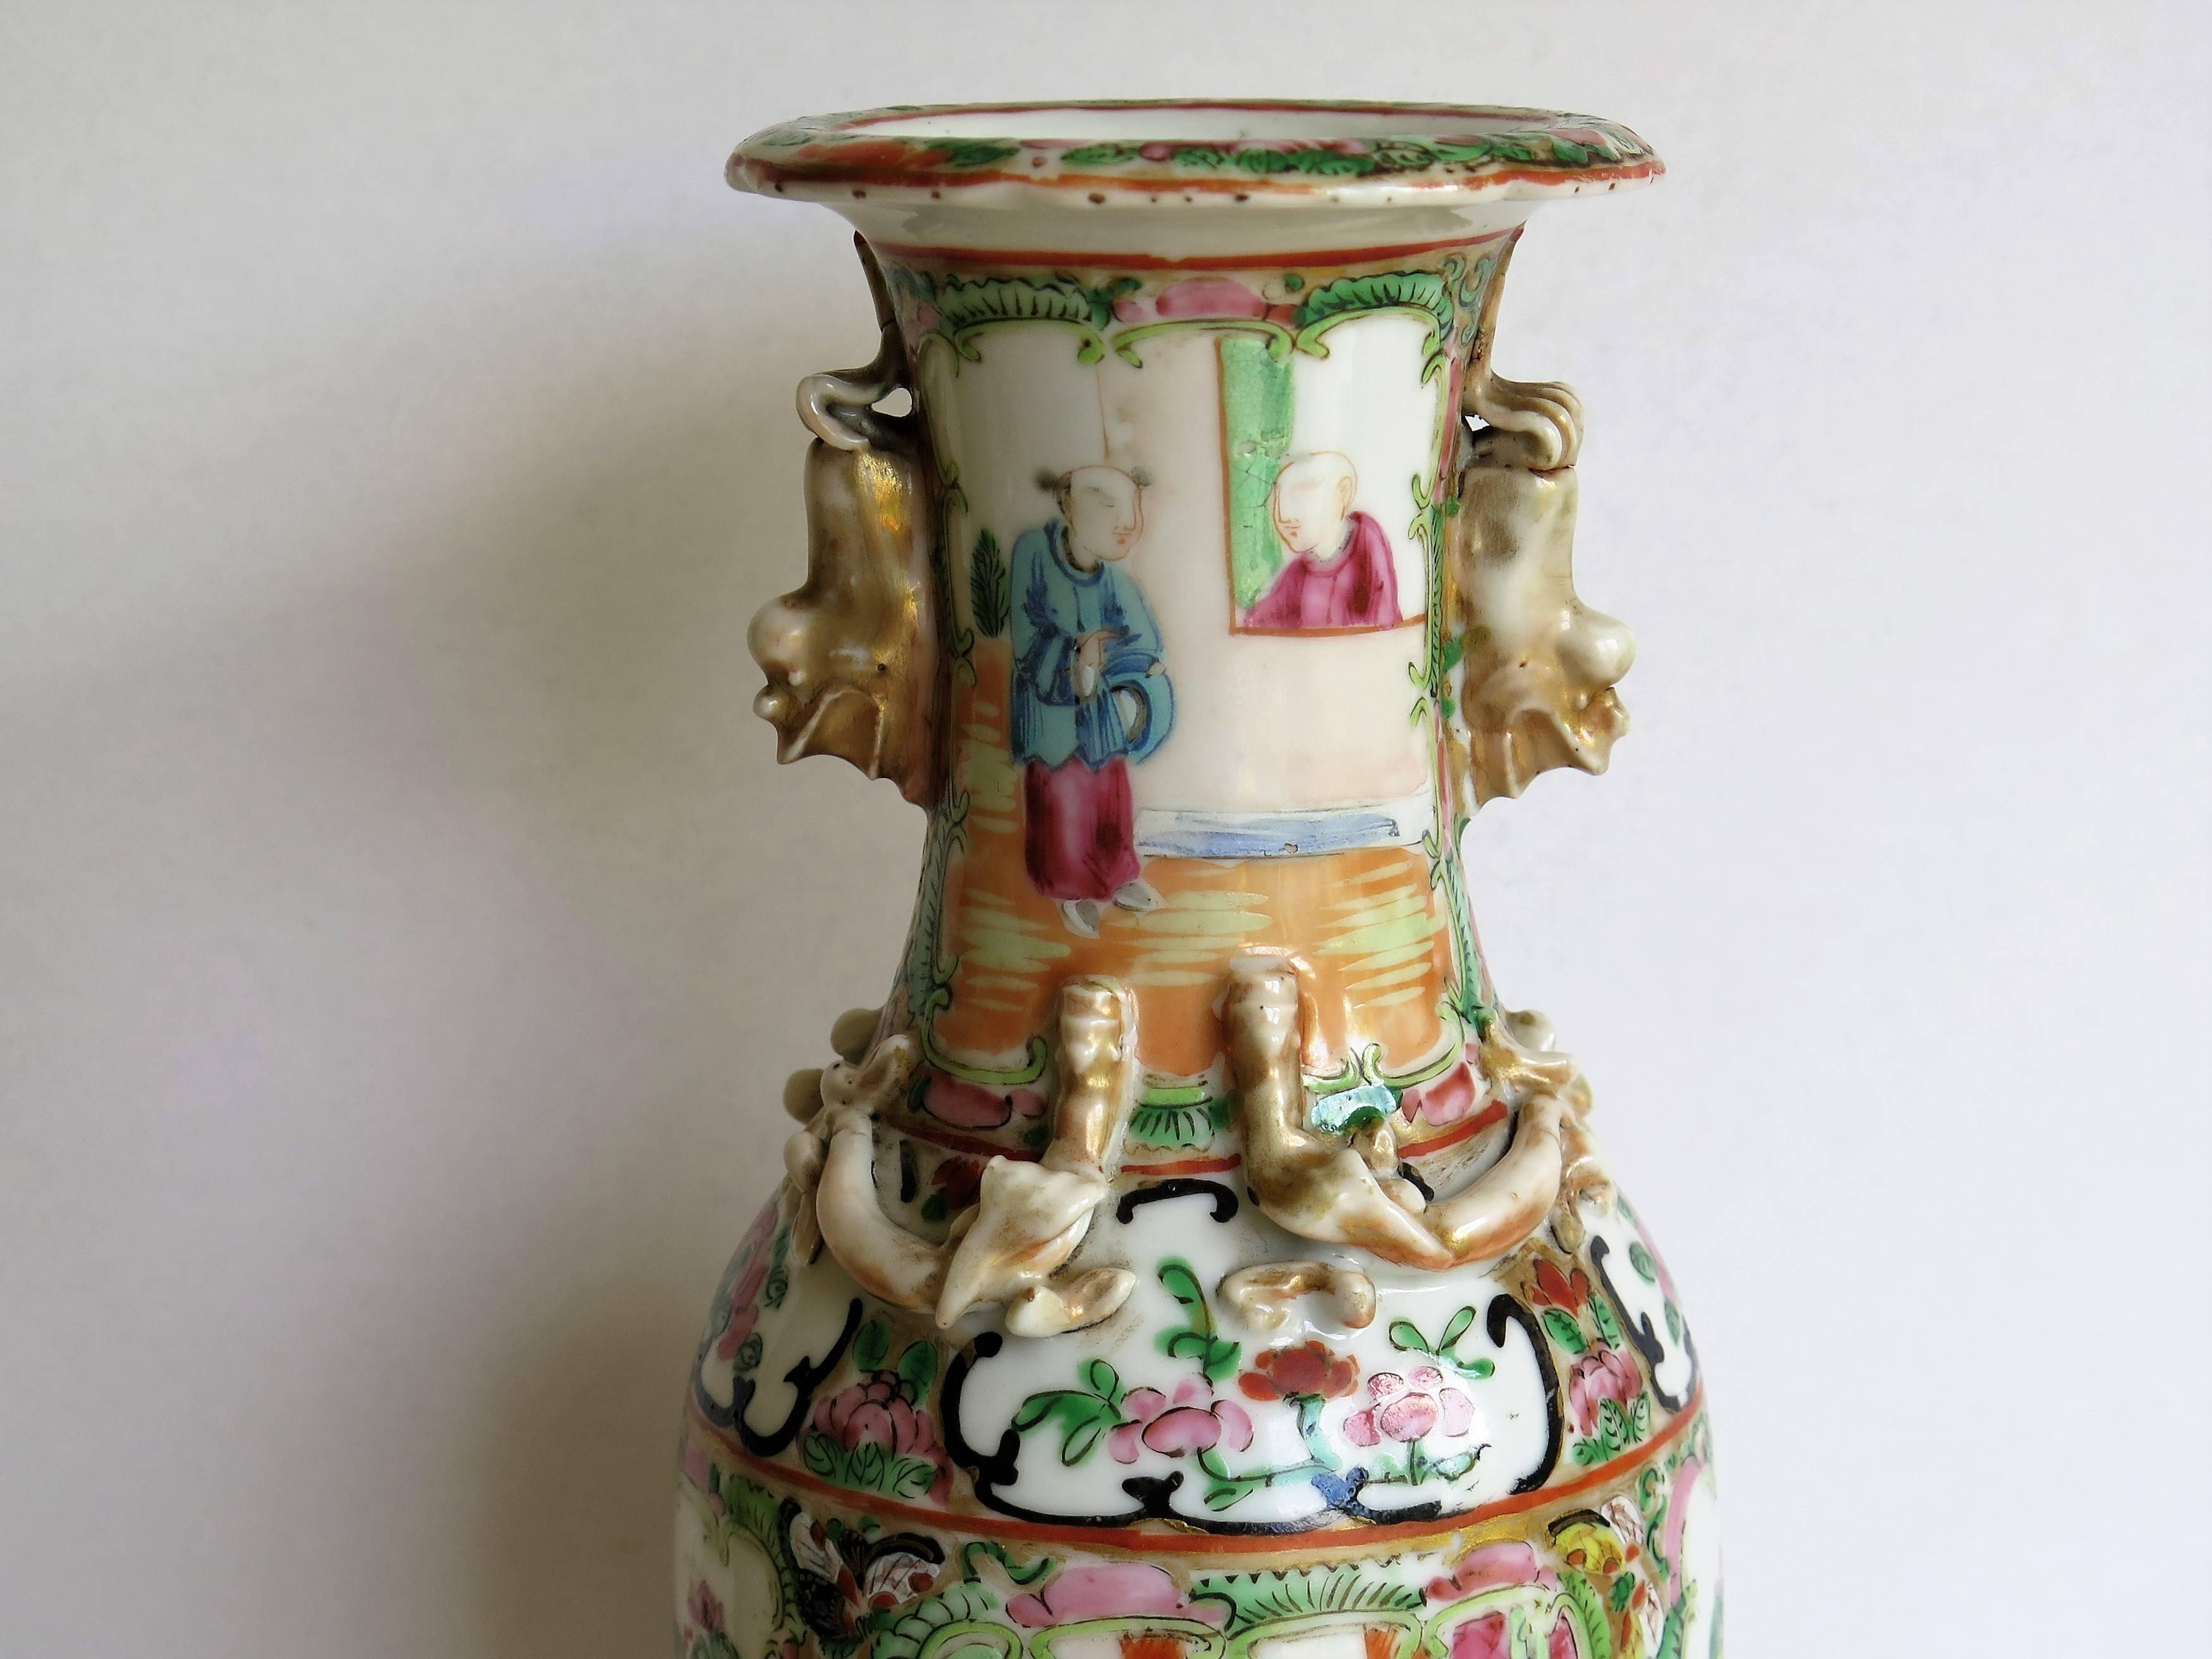 This is a very decorative Chinese export, porcelain, rose medallion Vase which we date to the 19th century, Qing dynasty, circa 1860.

The vase has a baluster shape with a flared rim and is embellished with two gilded Foo Dog handles and four